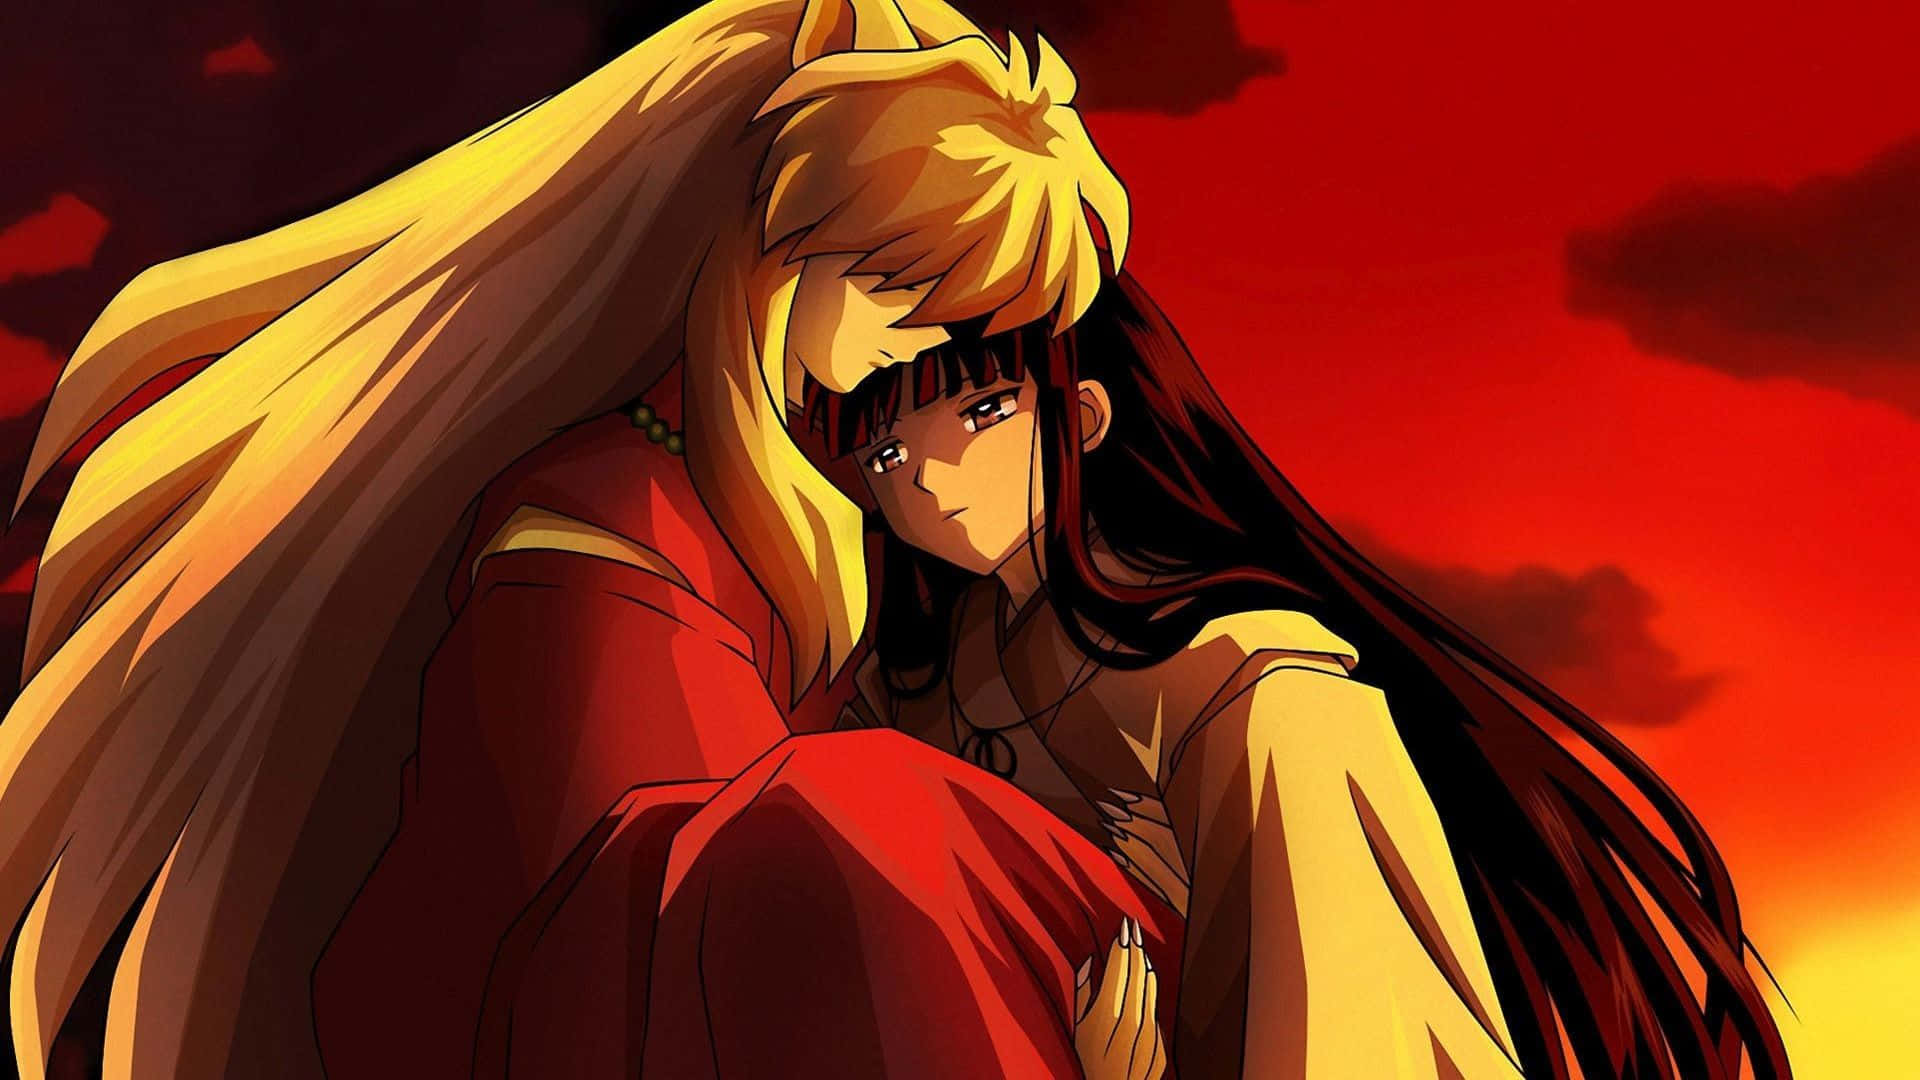 Inuyasha in Action Wallpaper